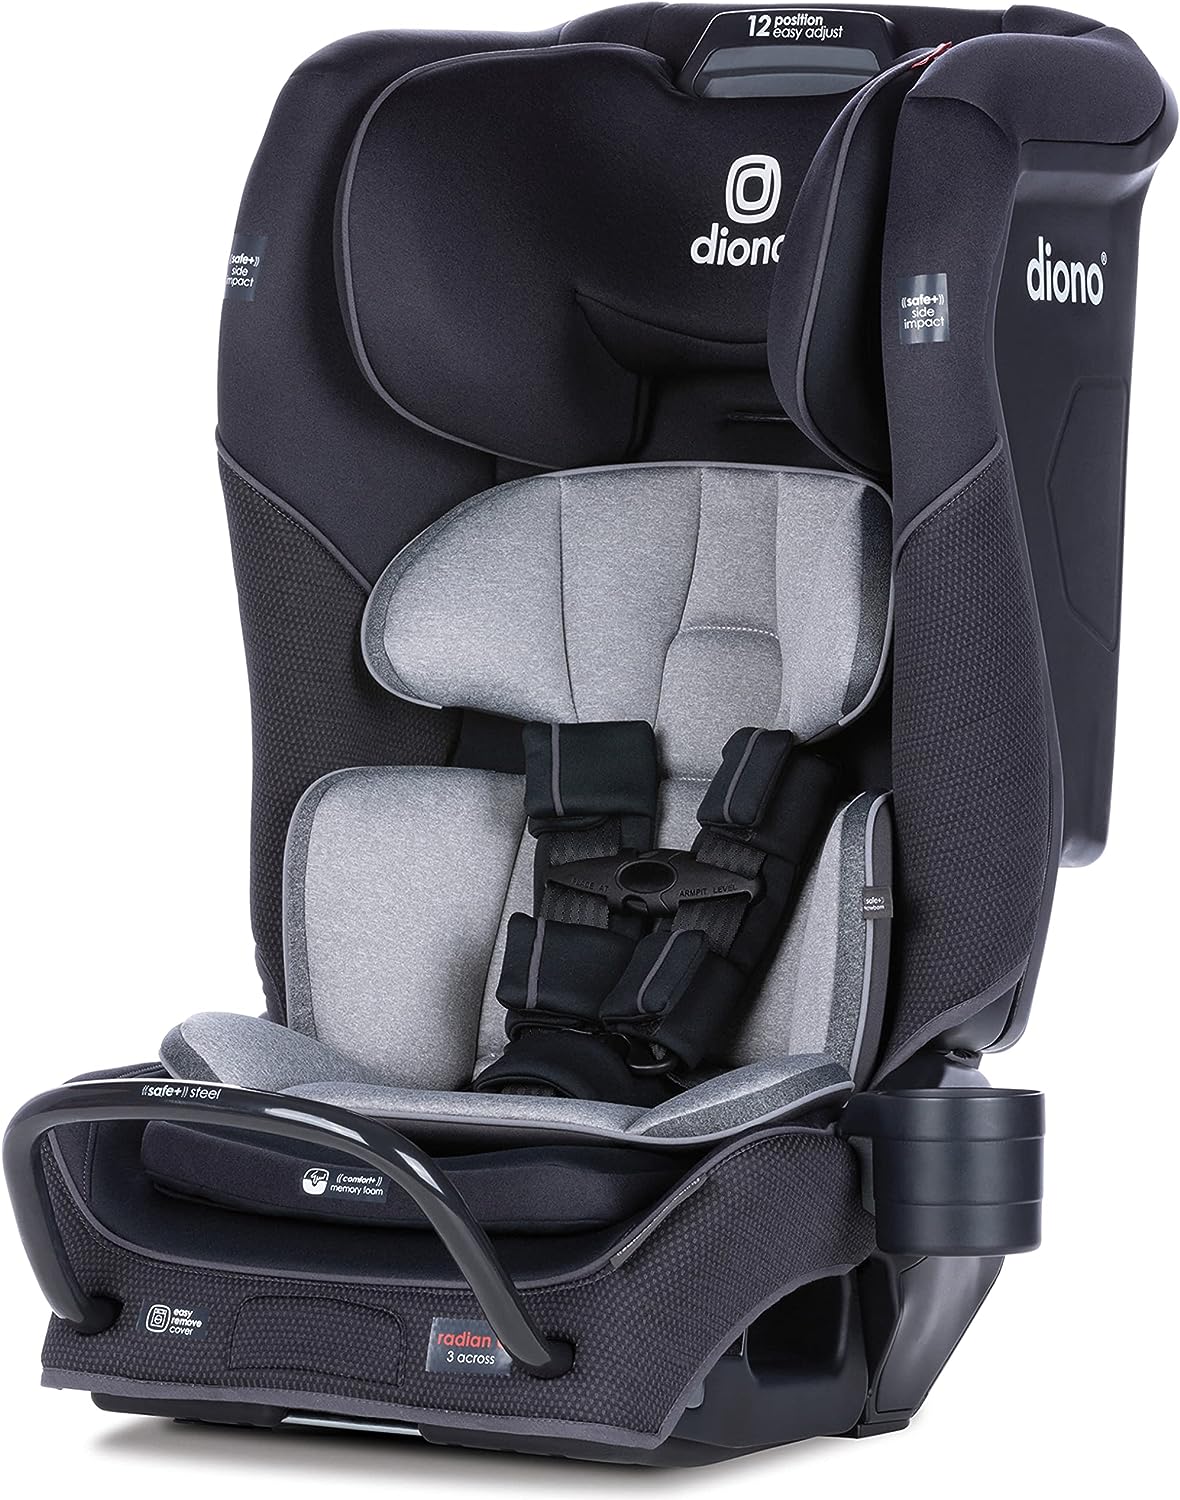 Diono Radian 3QX 4-in-1 Rear & Forward Facing Convertible Car Seat, Safe+ Engineering 3 Stage Infant Protection, 10 Years 1 Car Seat, Ultimate Protection, Slim Fit 3 Across, Black Jet